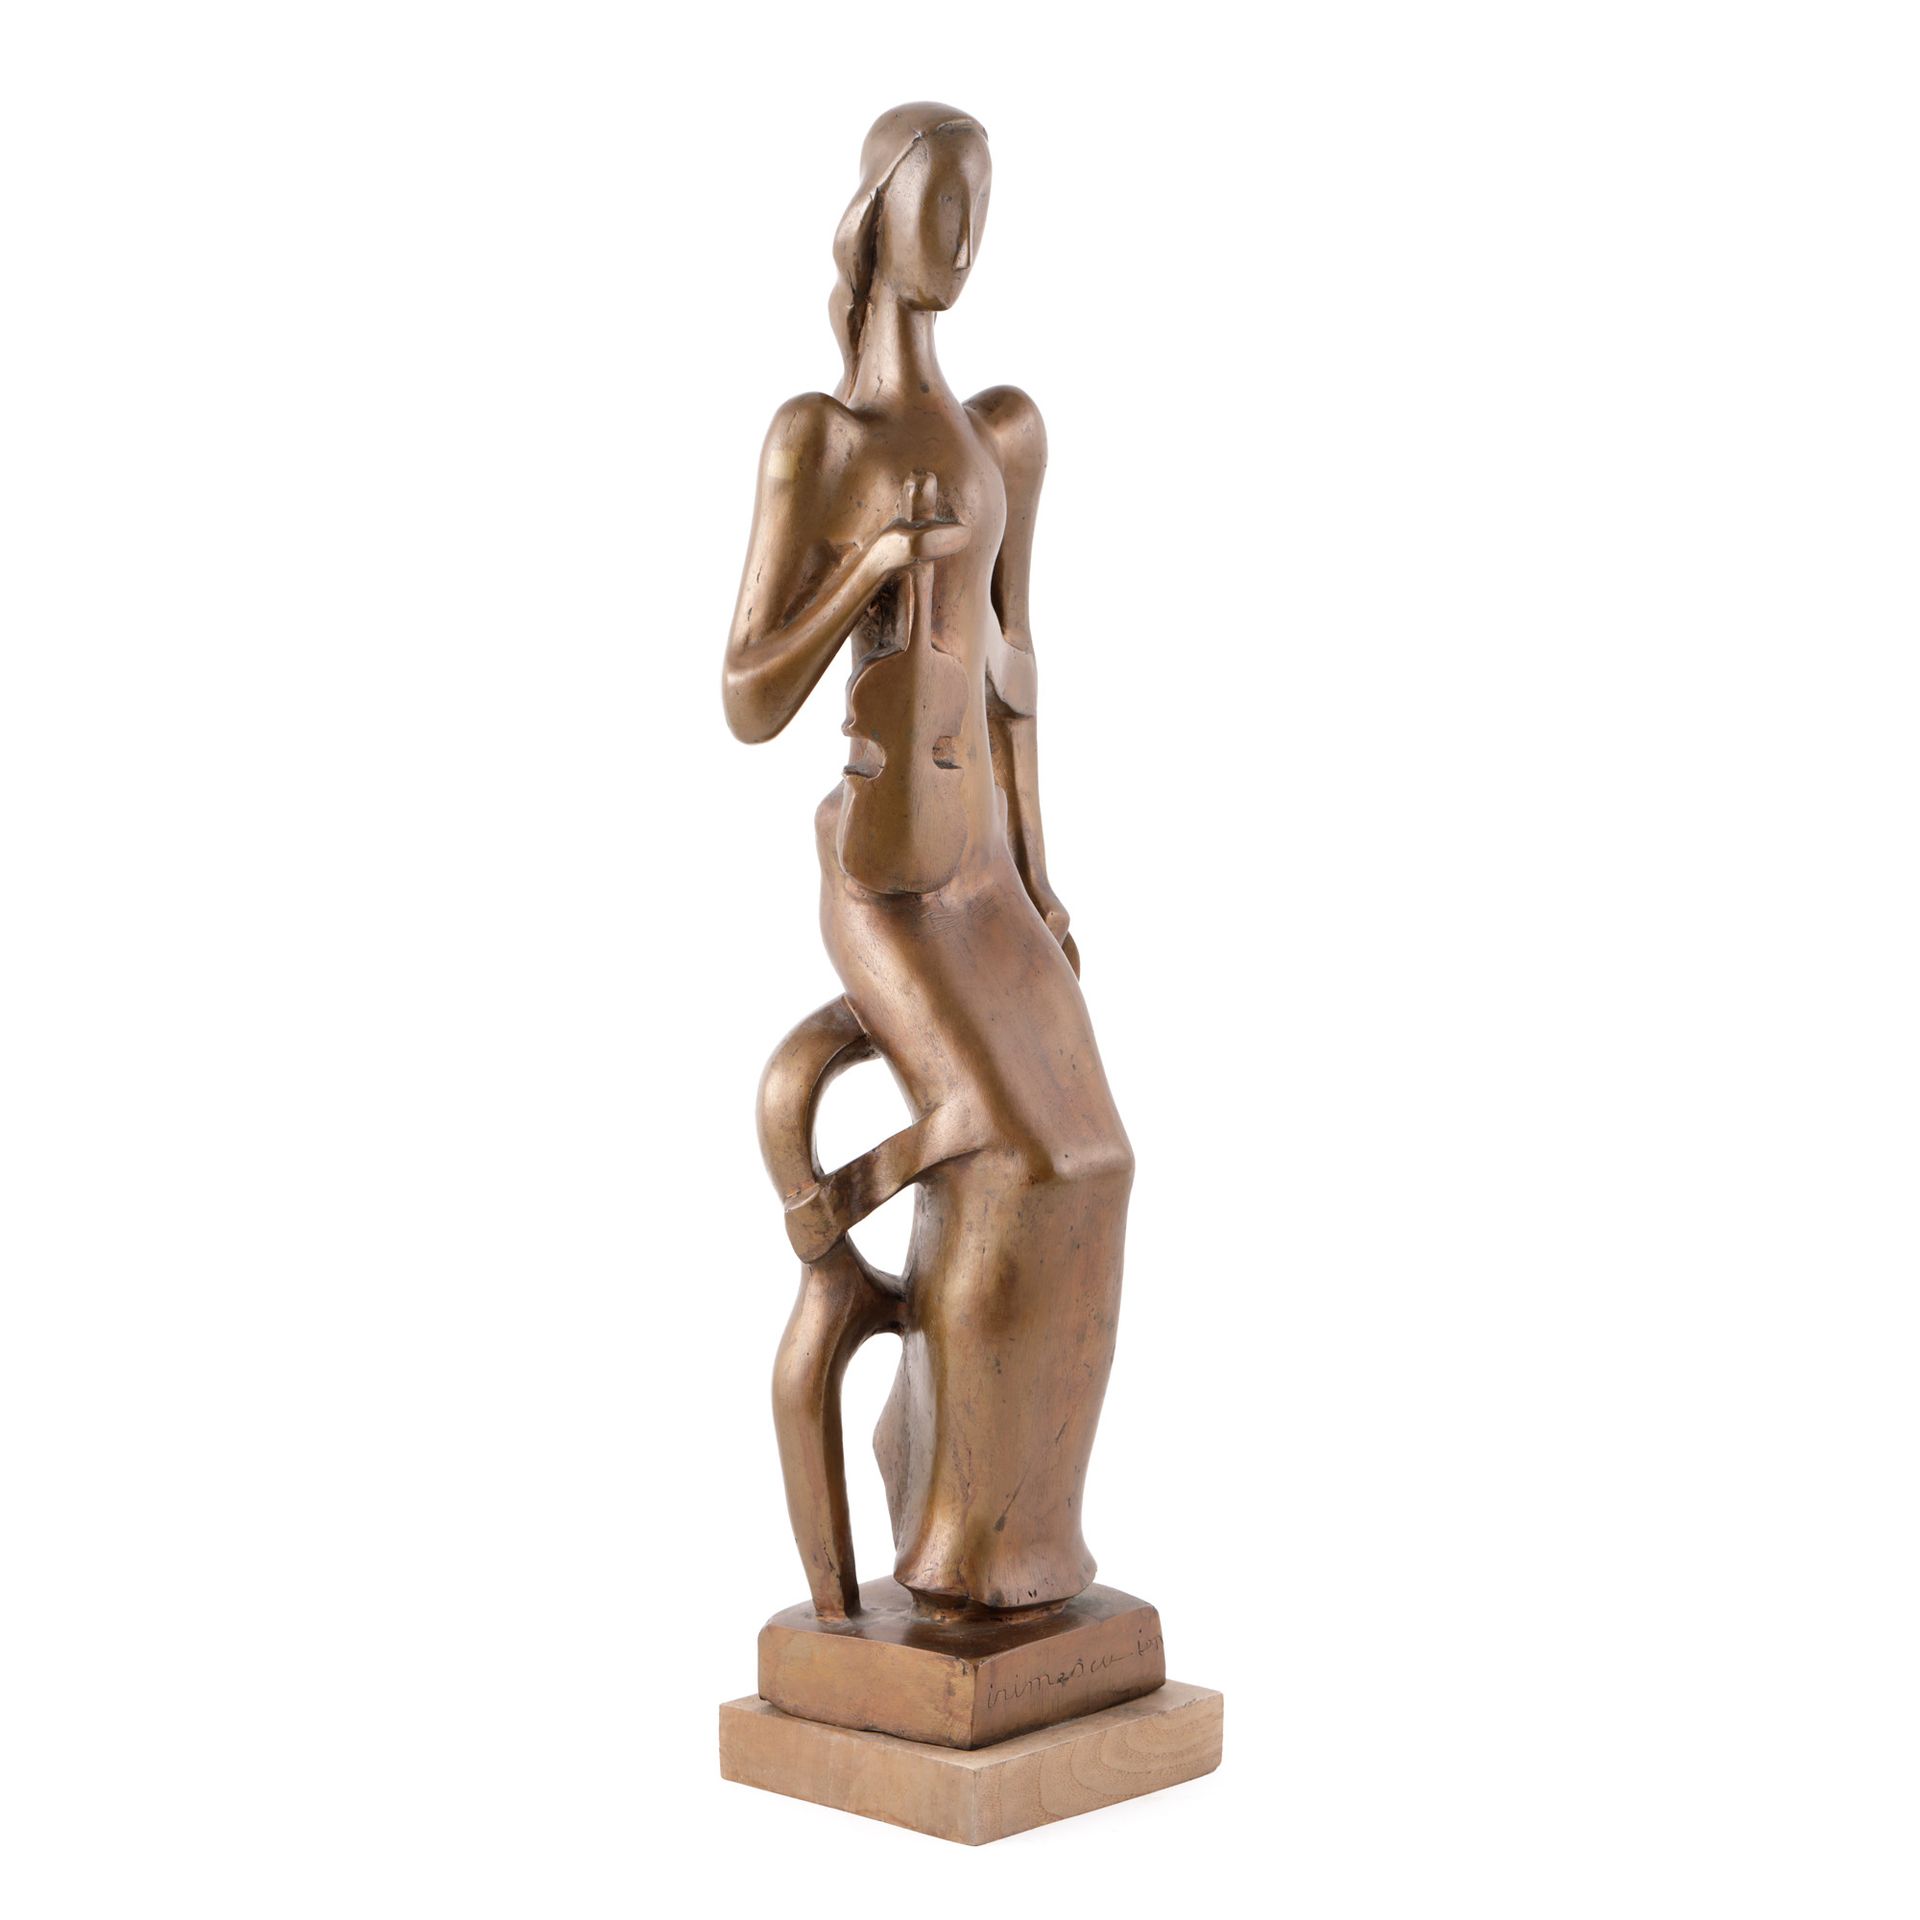 Ion Irimescu, Music bronze, 59.5 x 11.5 x 18, signed lower right, on the base, "&hellip;